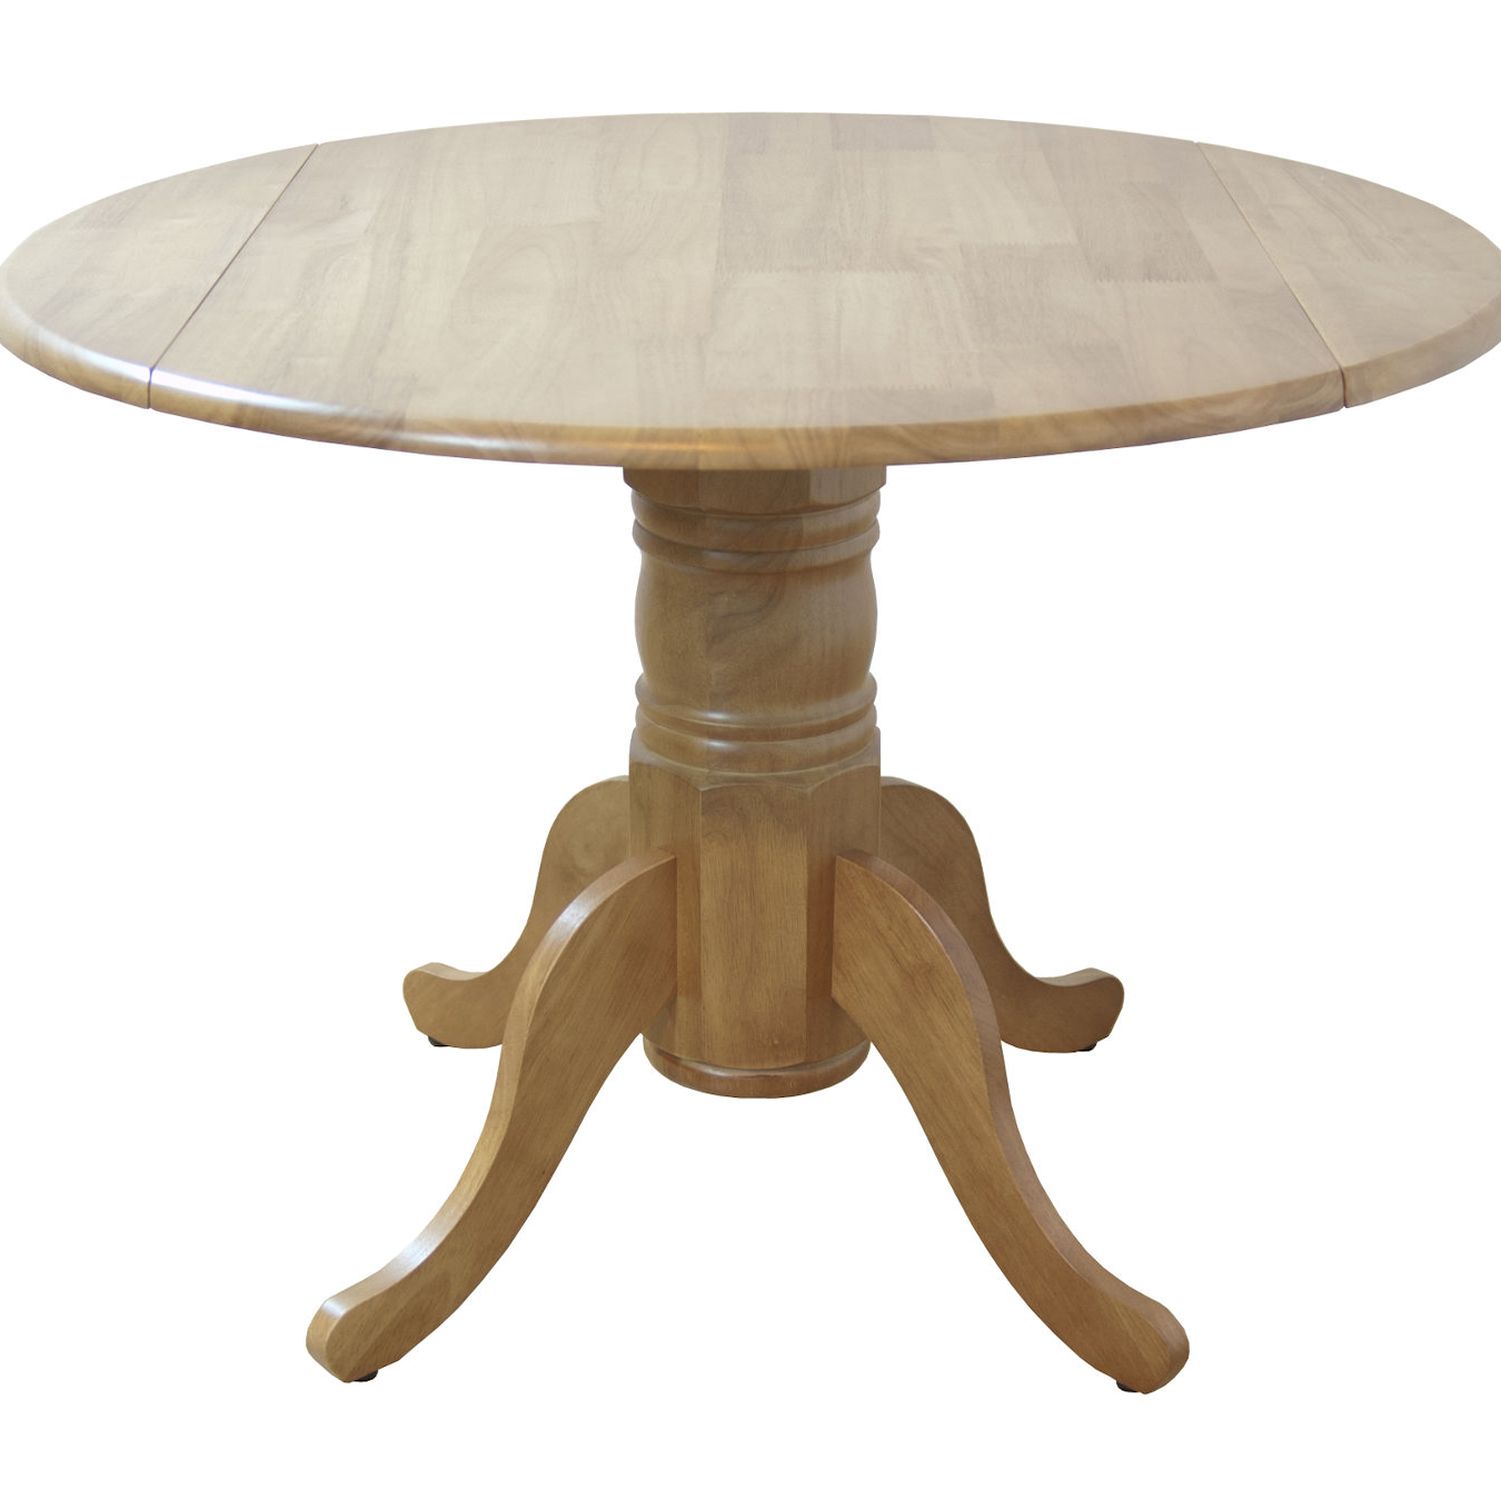 Round Kitchen Tables With Leaf photo - 4